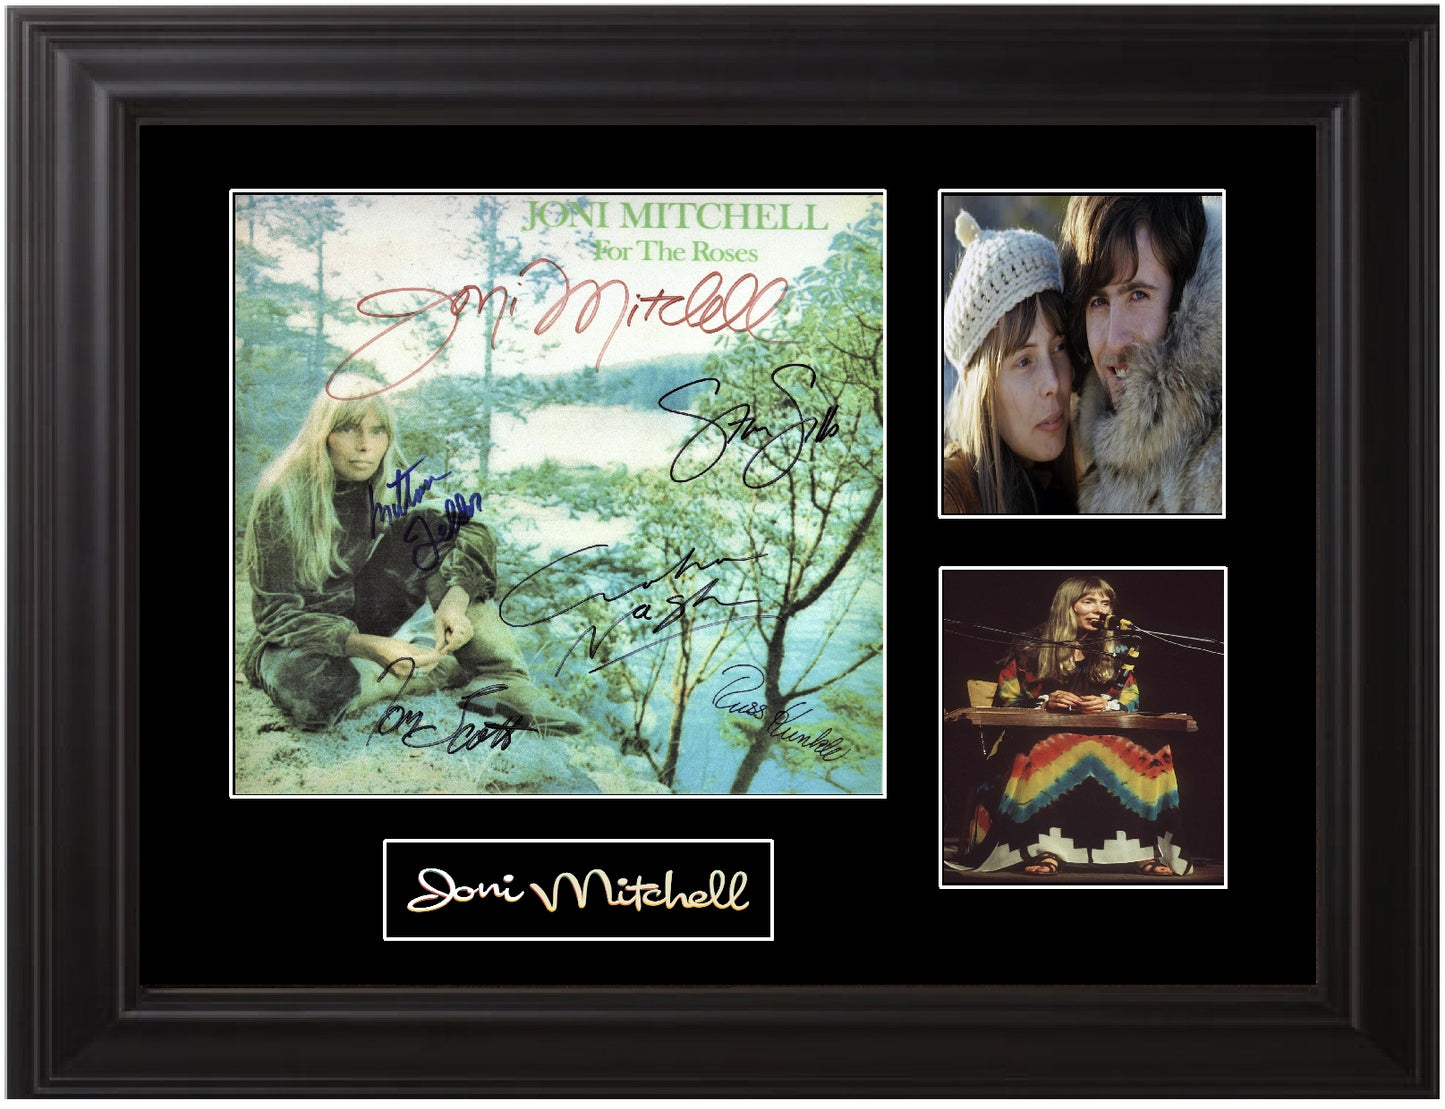 Joni Mitchell Signed For The Roses Lp - Zion Graphic Collectibles